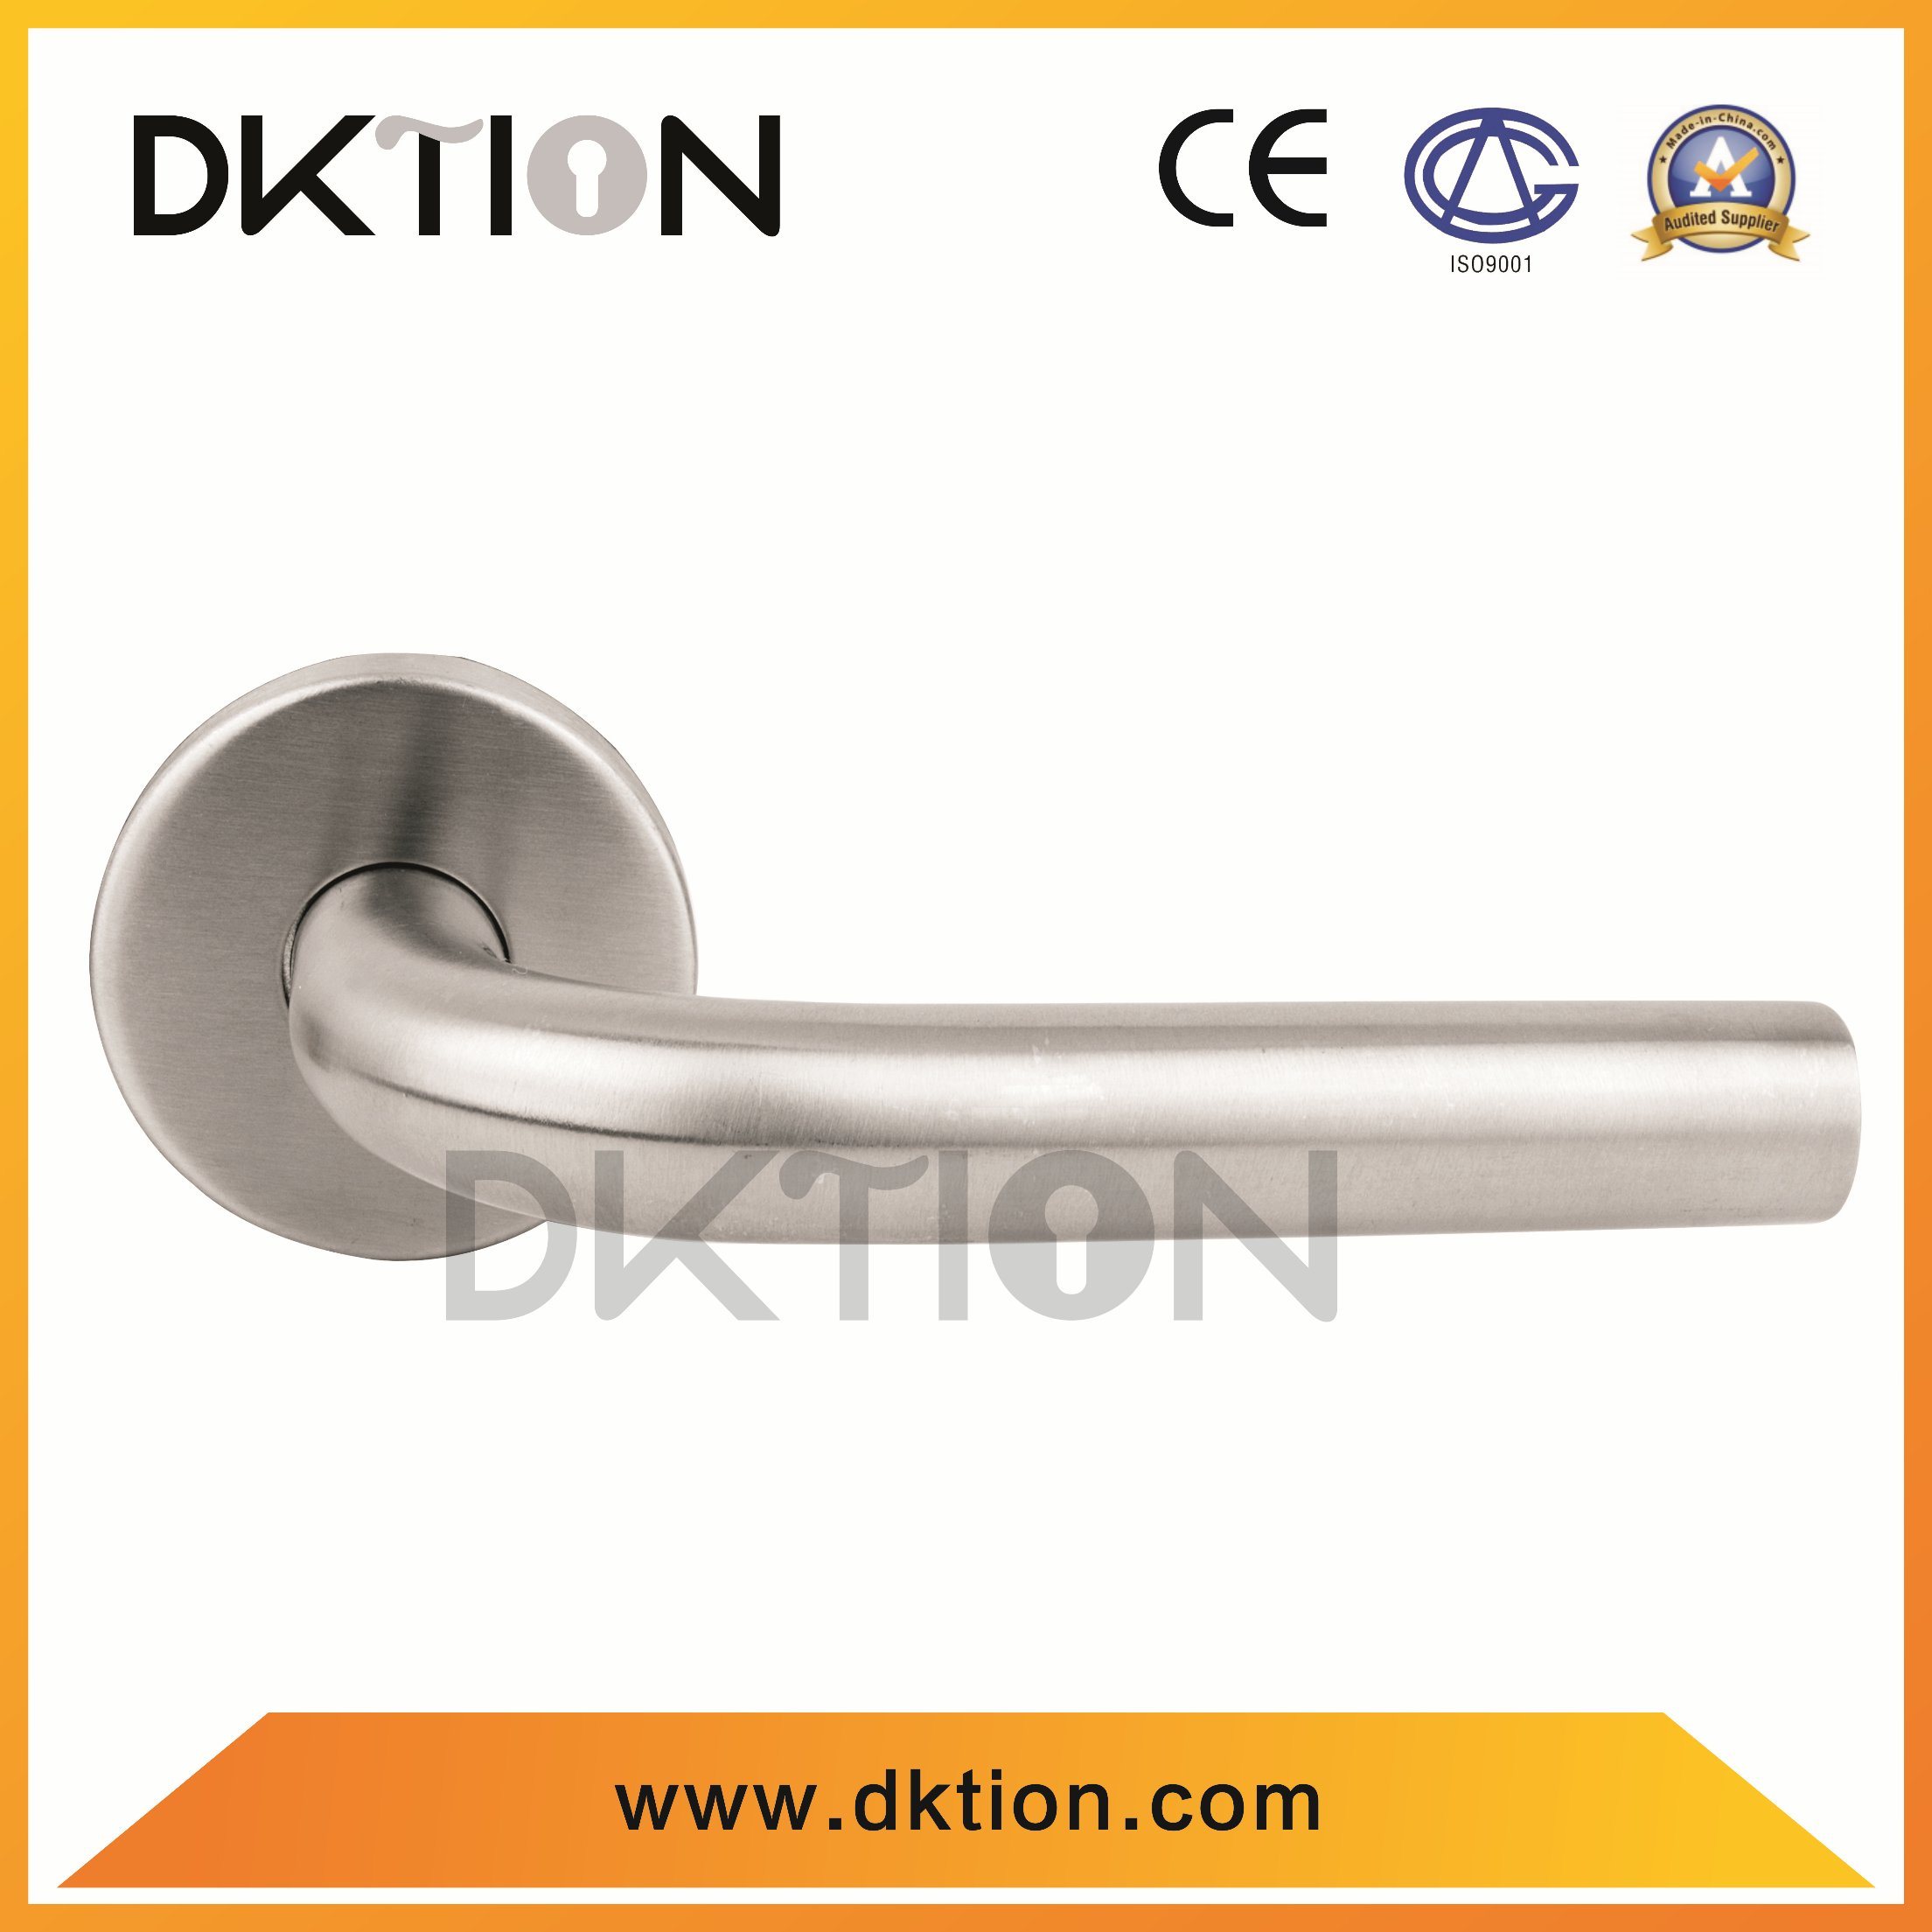 AT012 Straight Tube Stainless Steel Door Lever Handle